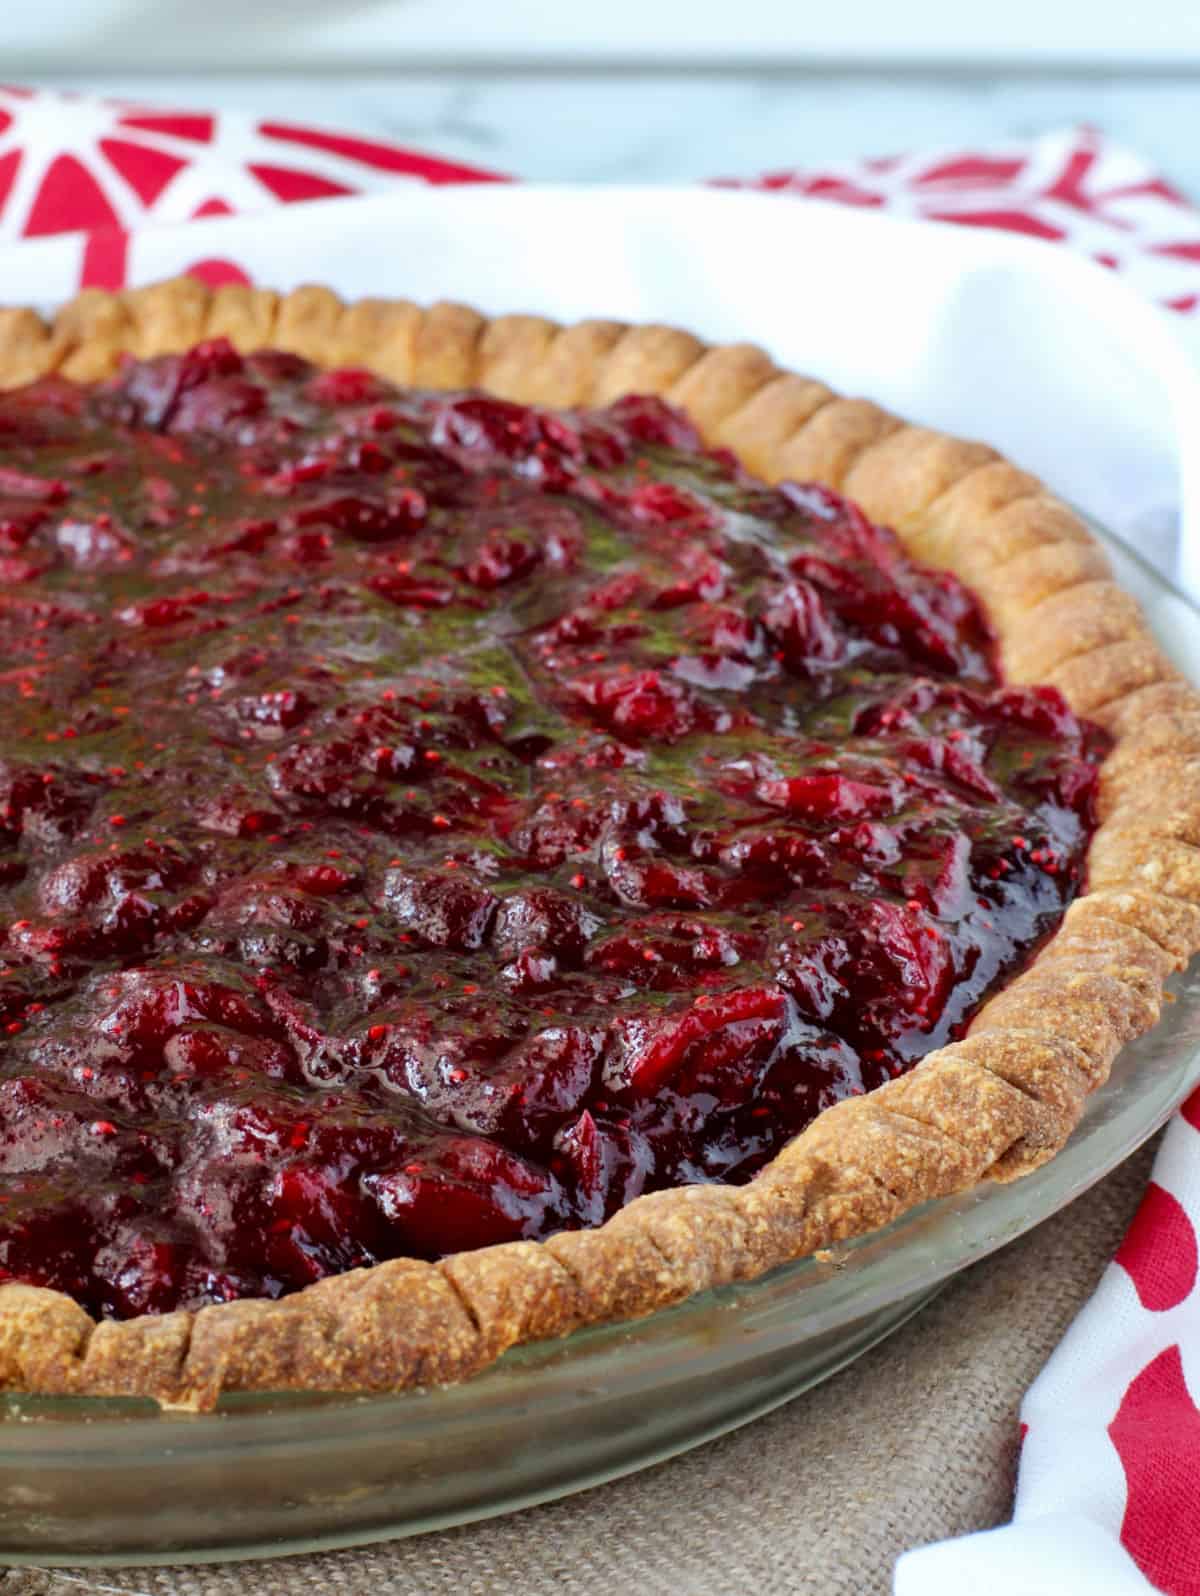 Whole Cranberry and Fudge Layered Pie in pie pan.